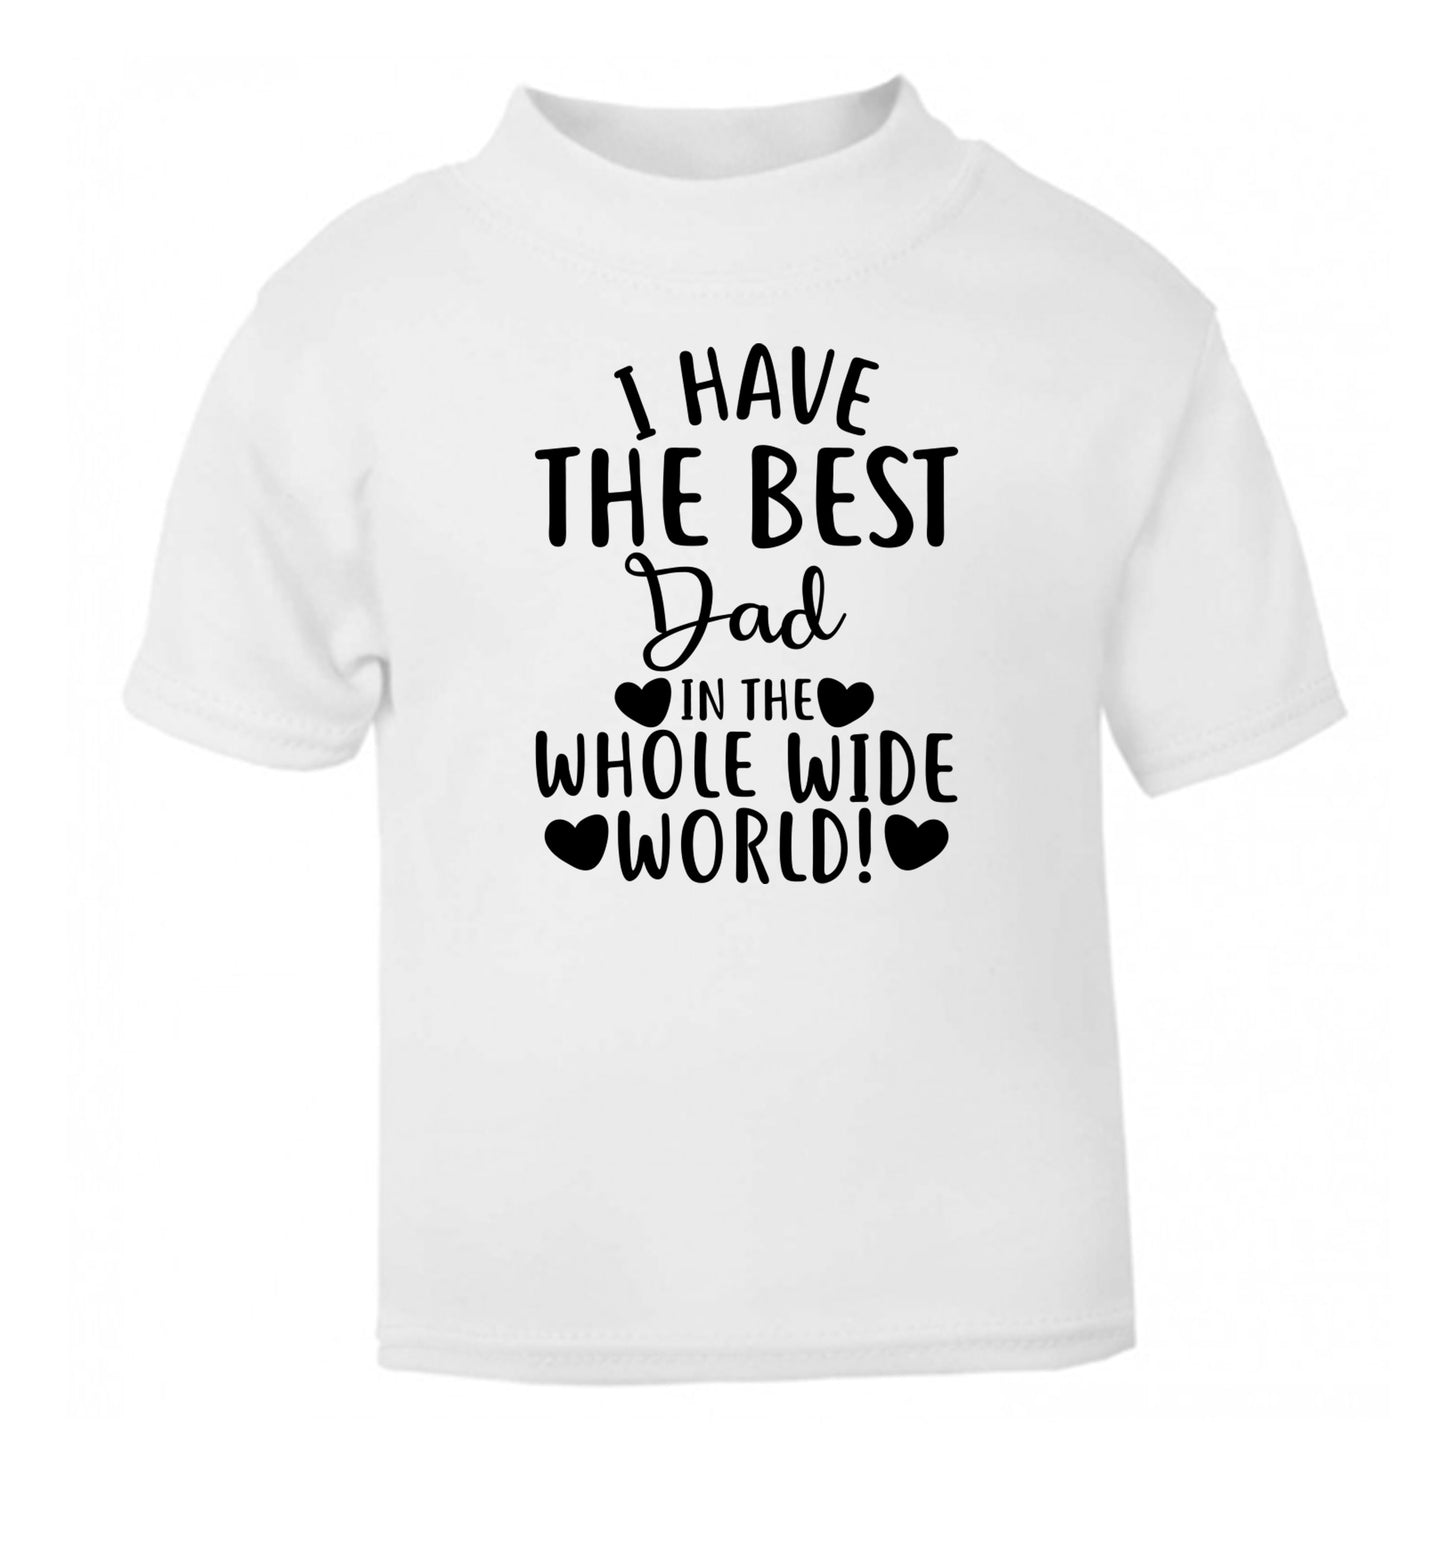 I have the best dad in the whole wide world! white Baby Toddler Tshirt 2 Years